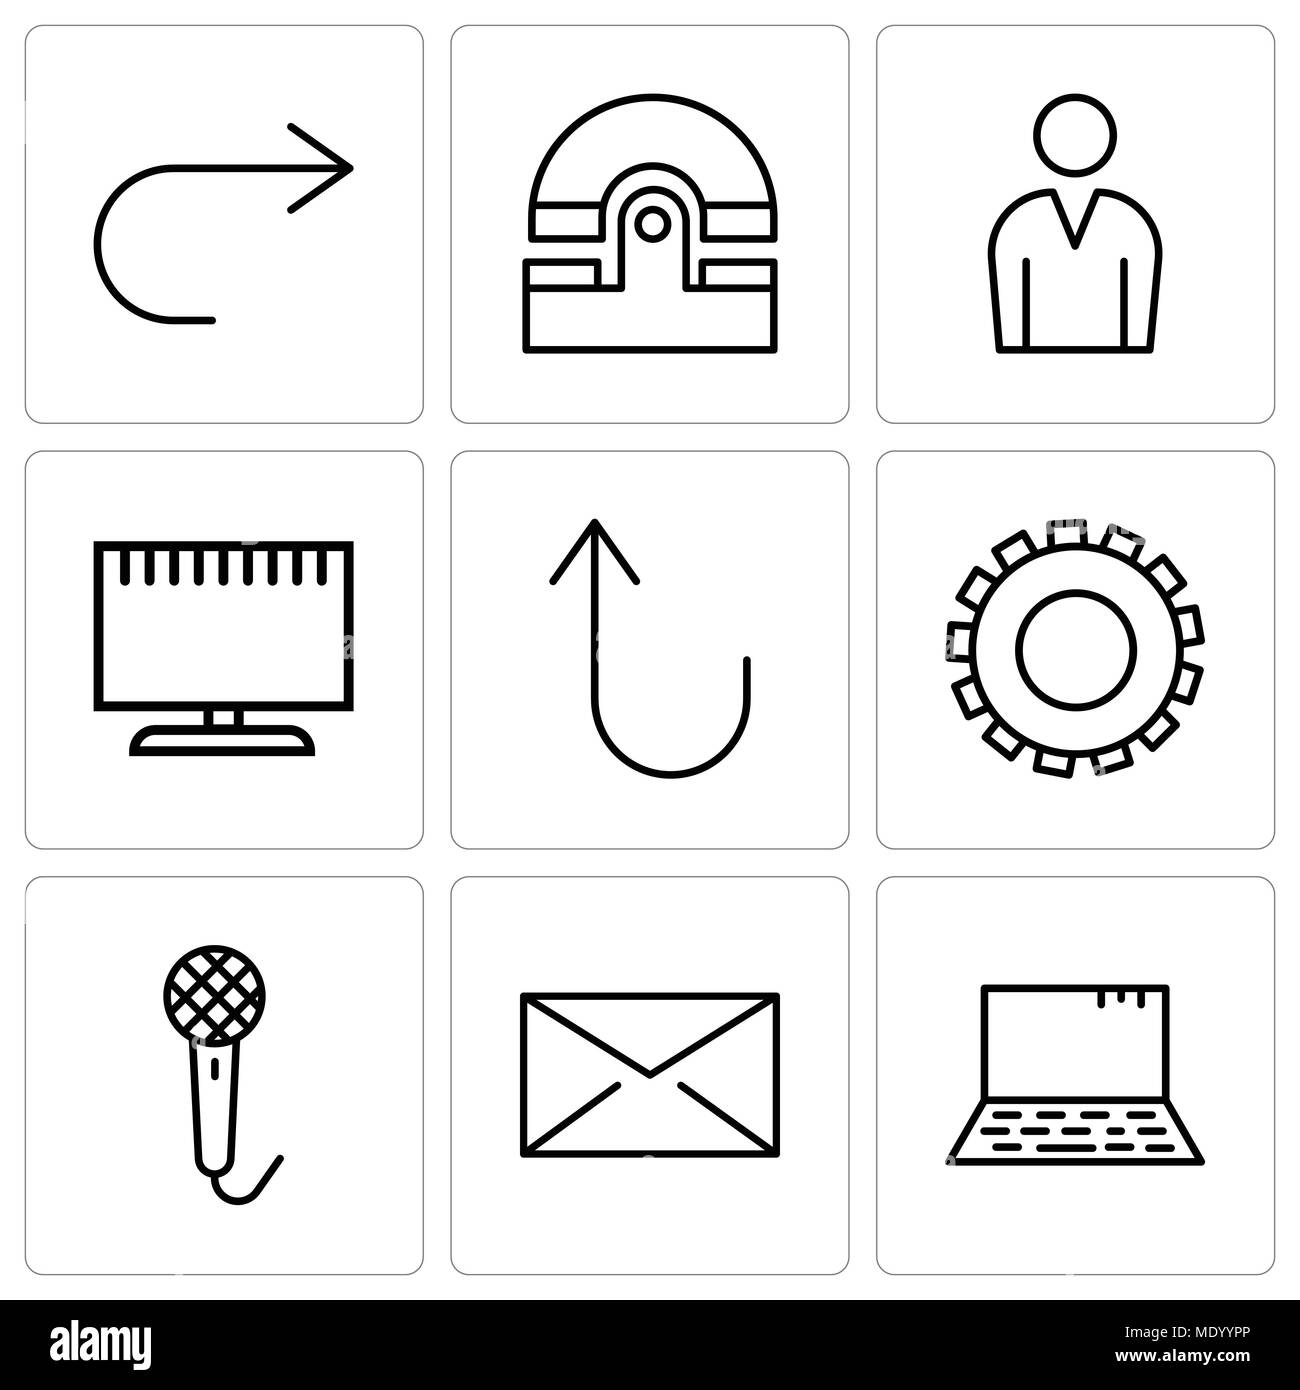 Set Of 9 simple editable icons such as Laptop, Closed envelope, Voice recorder, Gear, Cancel button, Television, Male avatar, Old phone, Arrow pointin Stock Vector